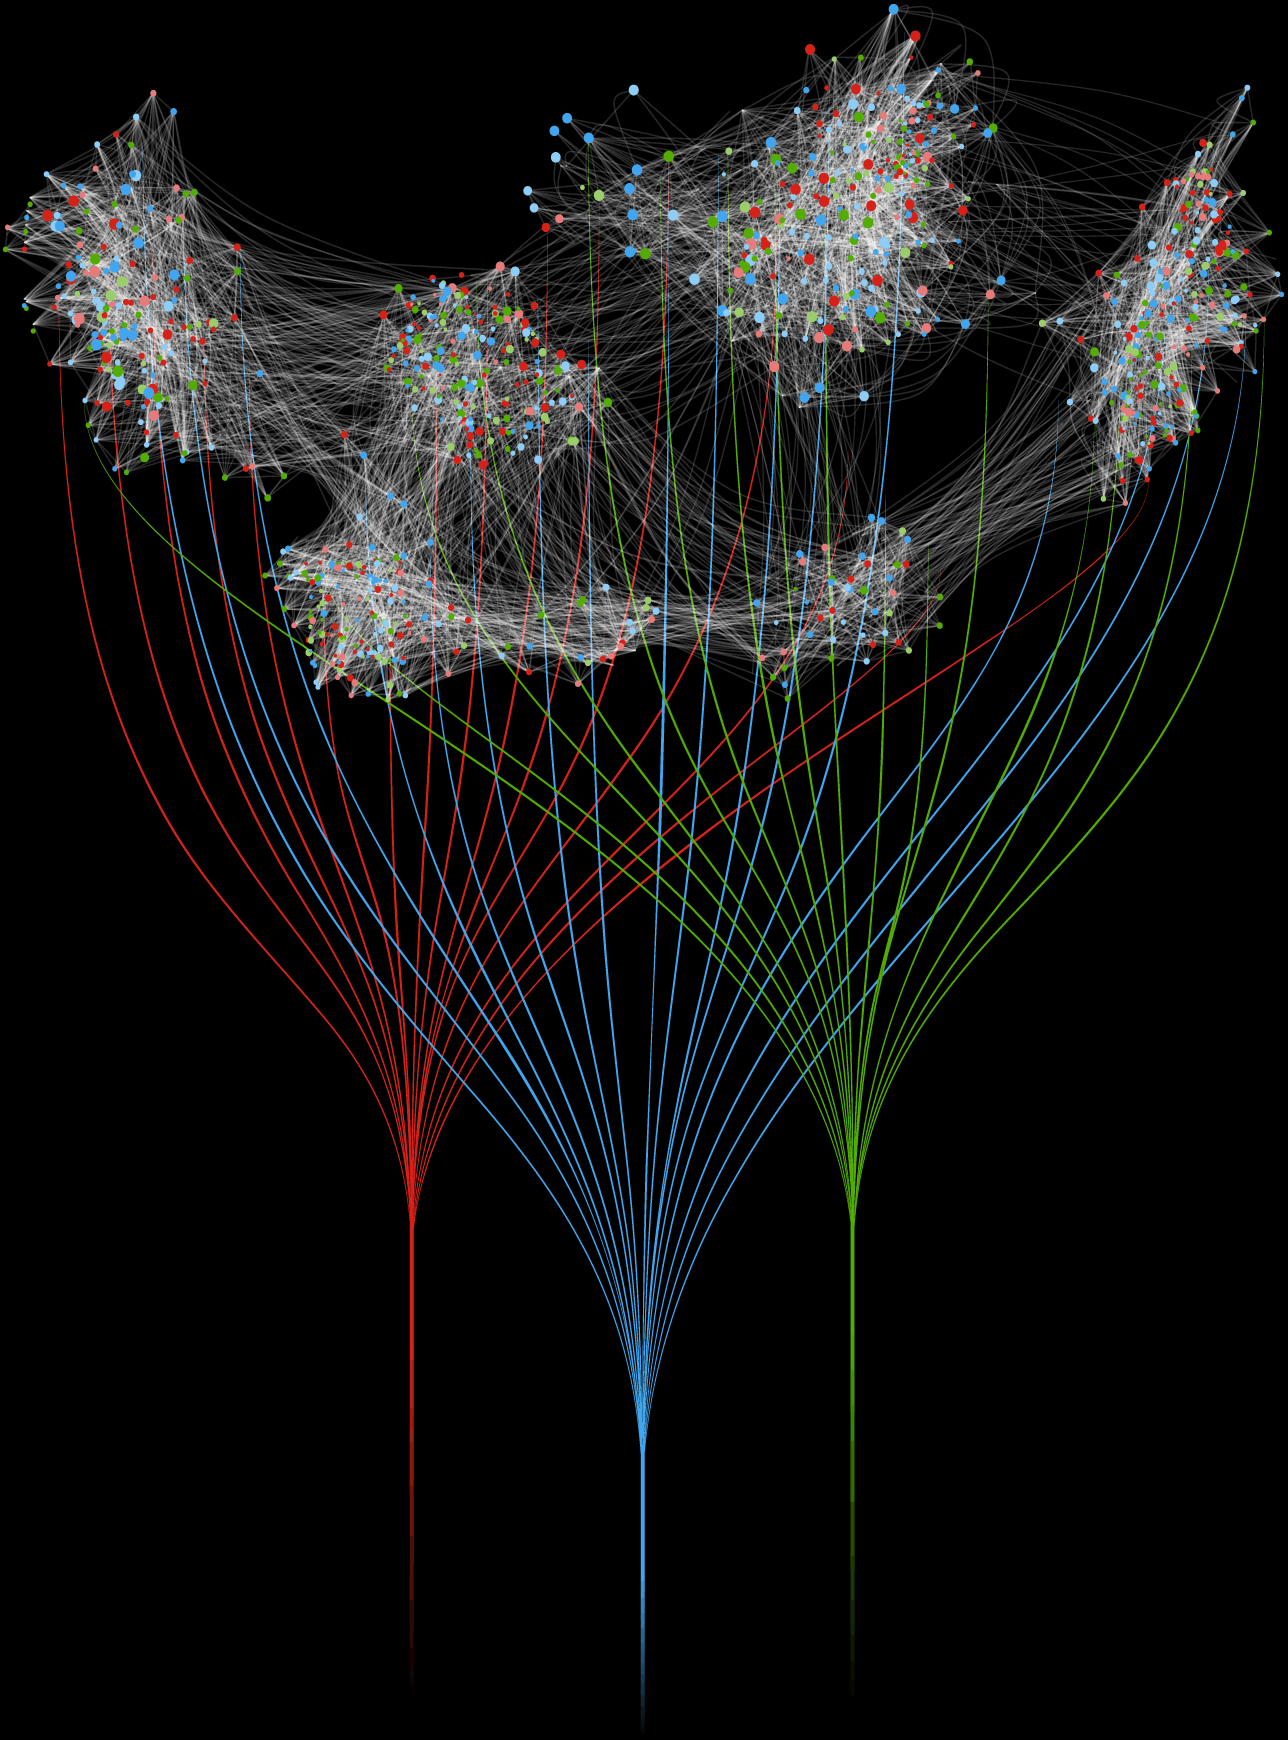 A galaxy-like image of multi-colored metaphorical data connections.